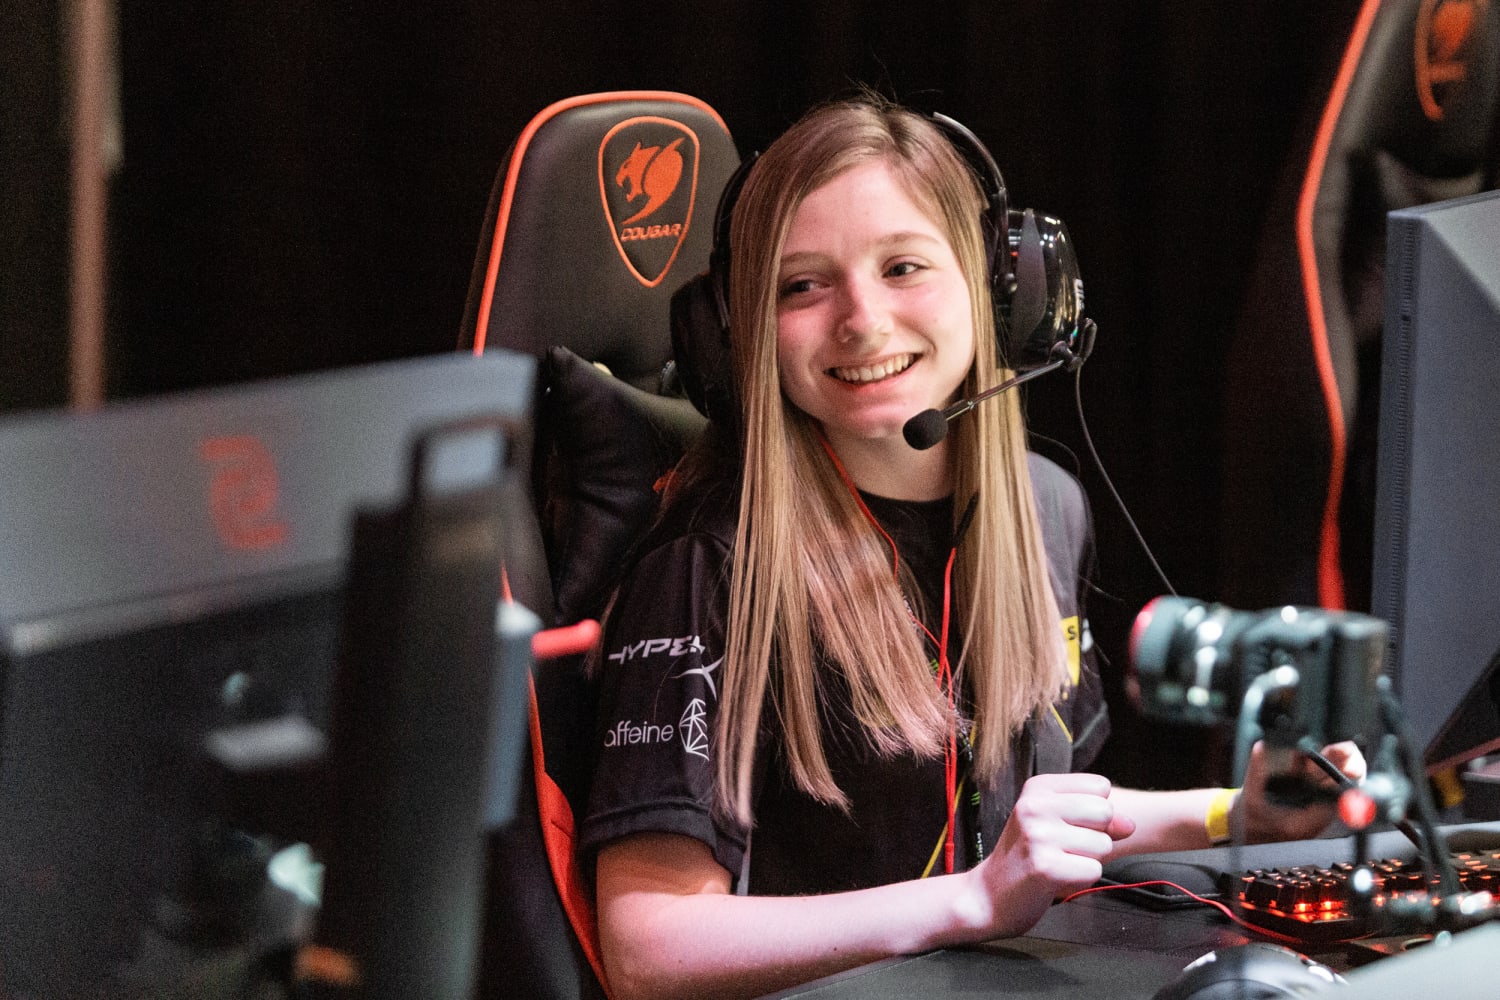 Esports tournament marks historic turn for women gamers